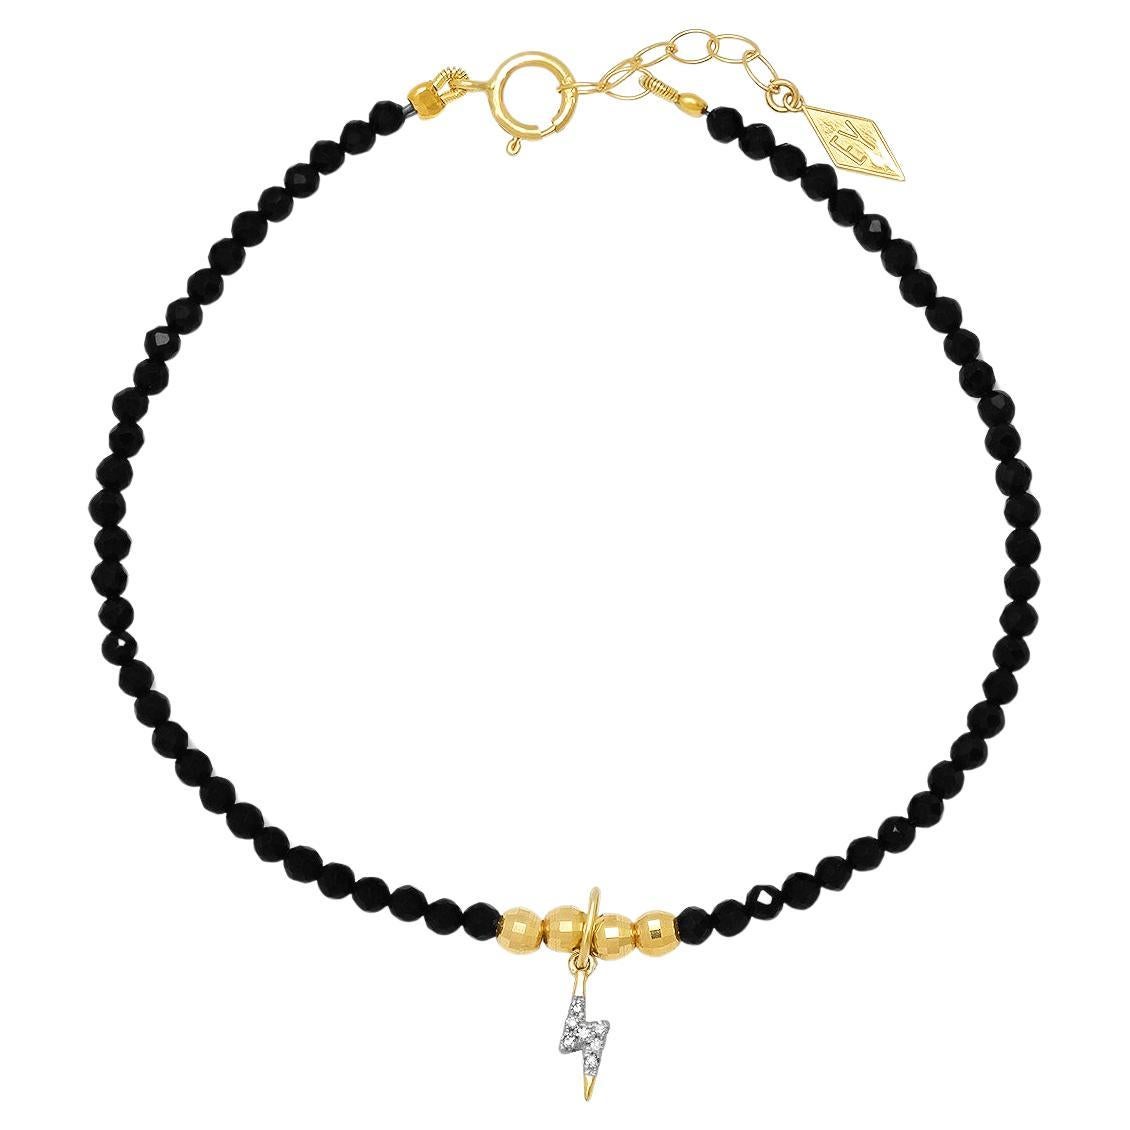 14k Gold, Spinell, Diamant "Special Edition" Mini Edelstein Heilung Charme Armband im Angebot